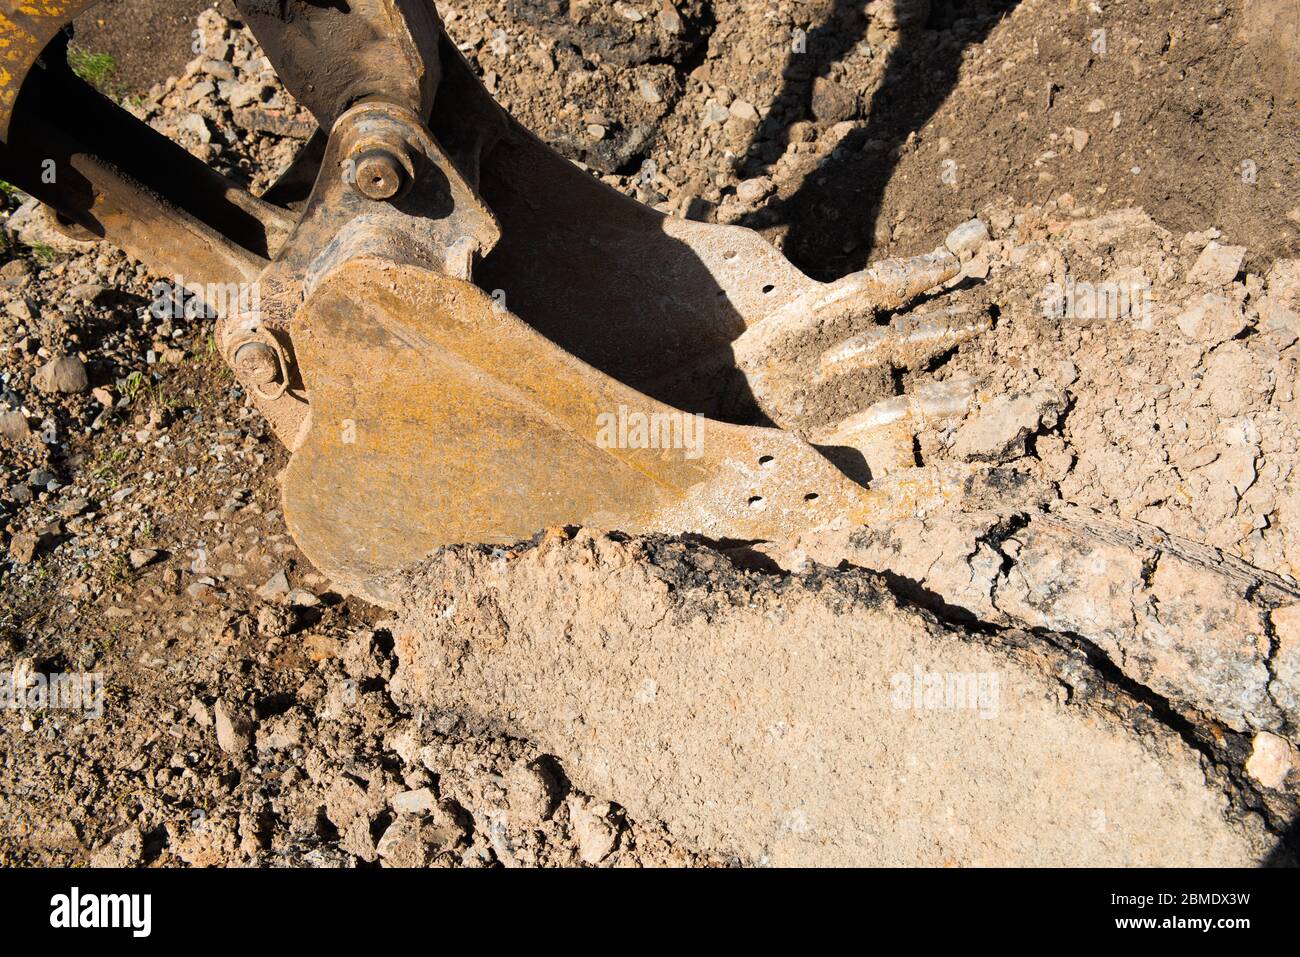 Backhoe scoop at a construction site, digging up dirt for a building project. Stock Photo